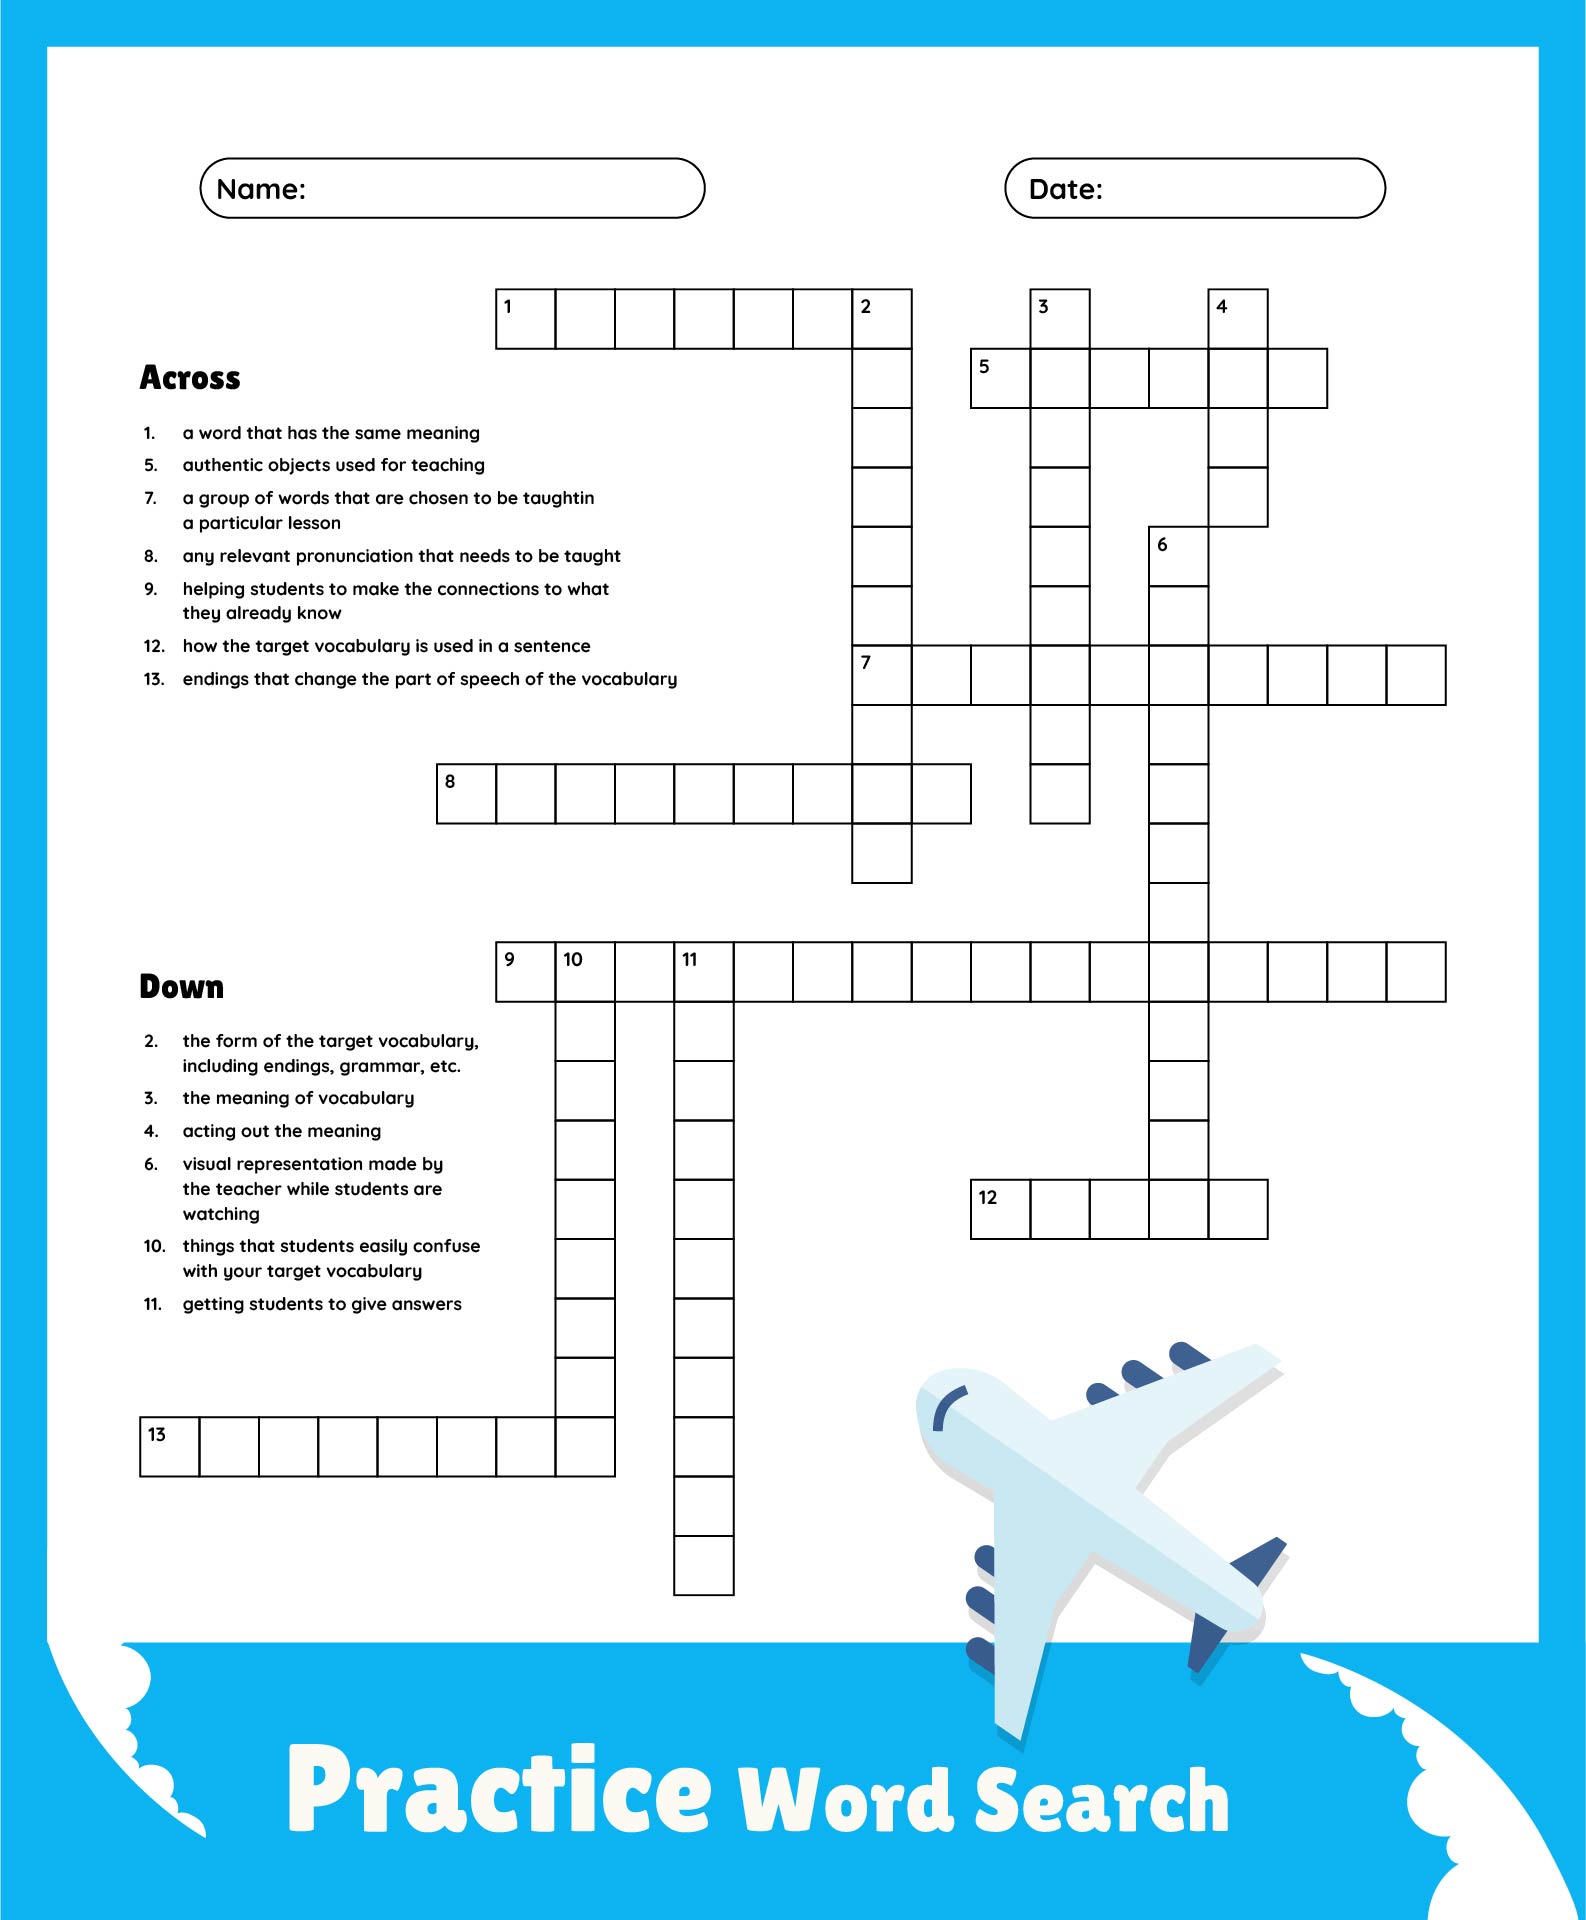 4-best-images-of-free-crosswords-puzzle-printable-outs-free-printable